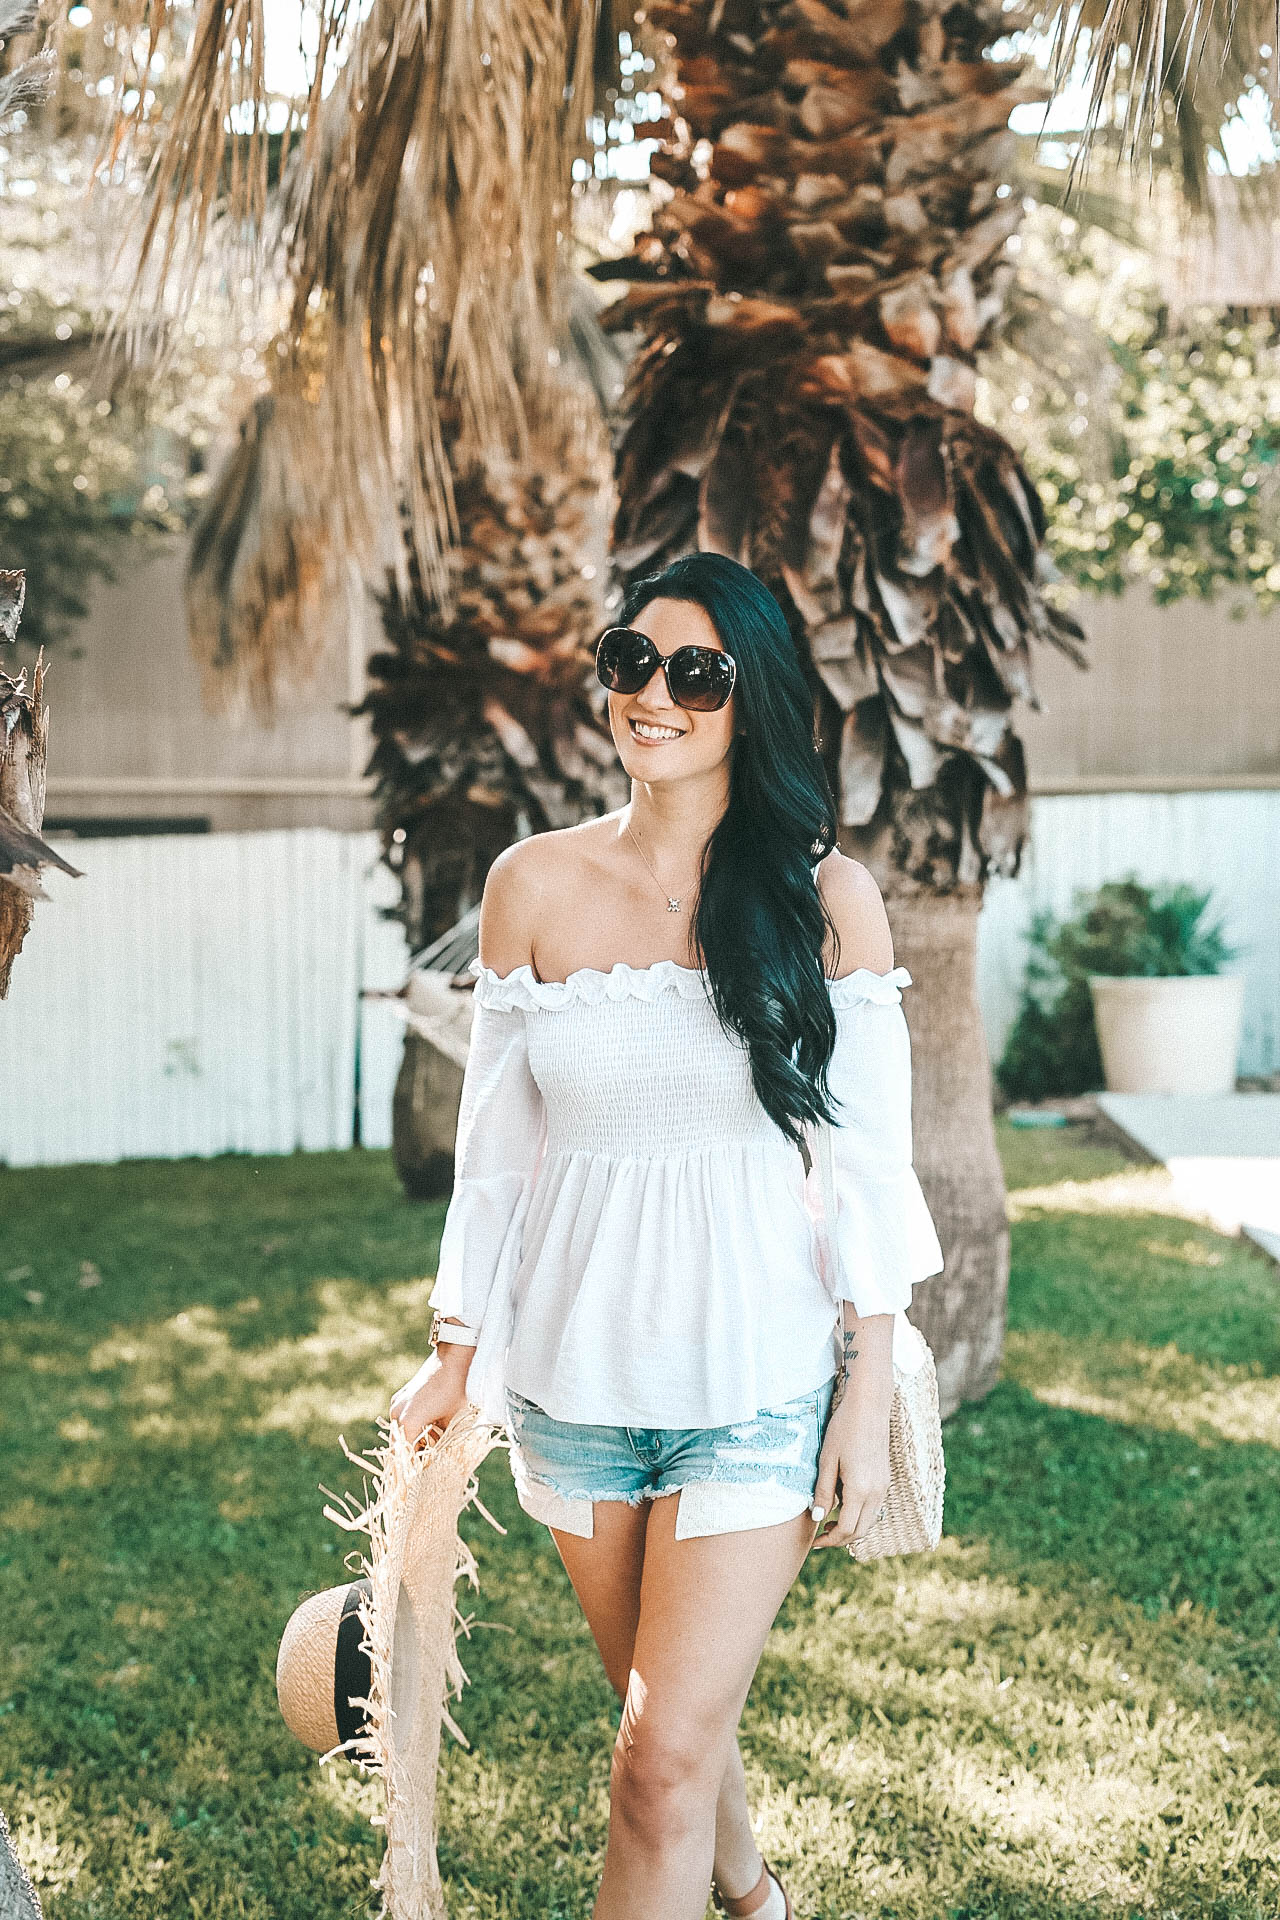 DTKAustin shares where to get the best white tops for summer from Chicwish that wont break the bank along with her frayed straw hat on sale. | summer tops for less | affordable summer style | summer fashion tips | summer style | white tops for summer || DTK Austin #fashion #style #summerstyle #summerfashion #womensfashion #summertops #affordablefashion #summeroutfits - {Affordable Summer Tops That Won't Break the Bank} featured by popular Austin fashion blogger, Dressed to Kill